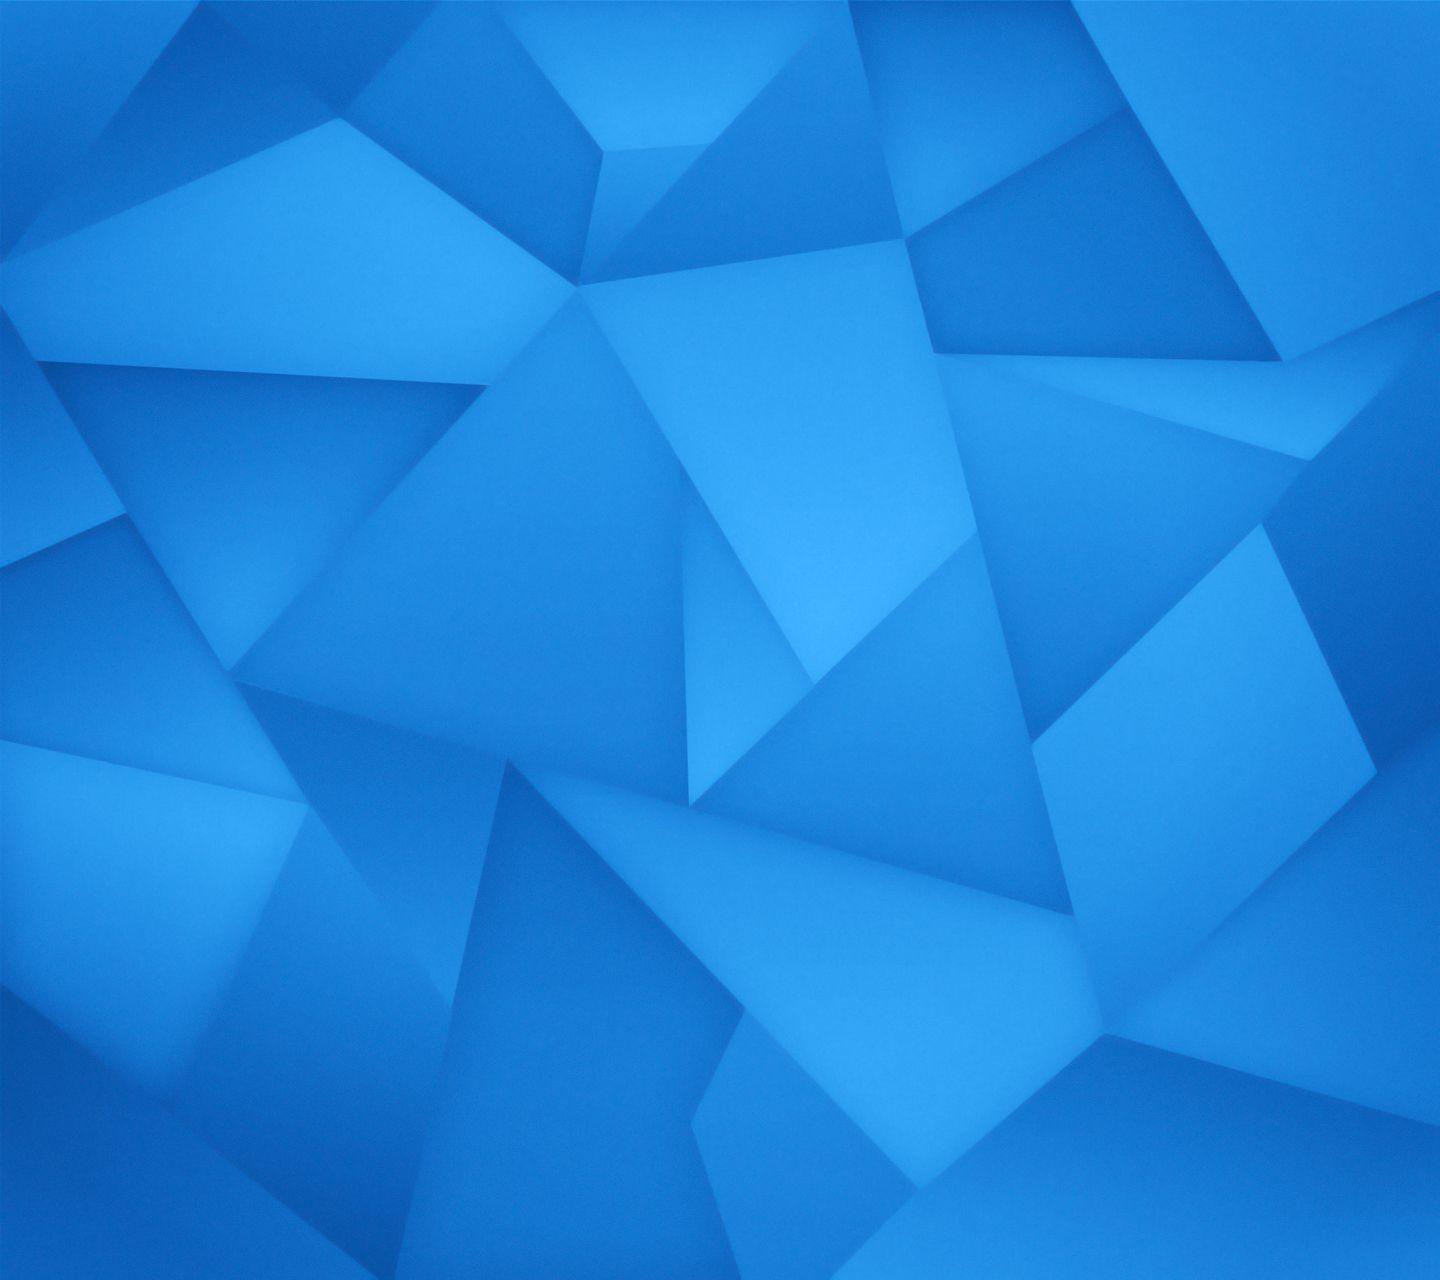 Triangle wallpaper for your Android